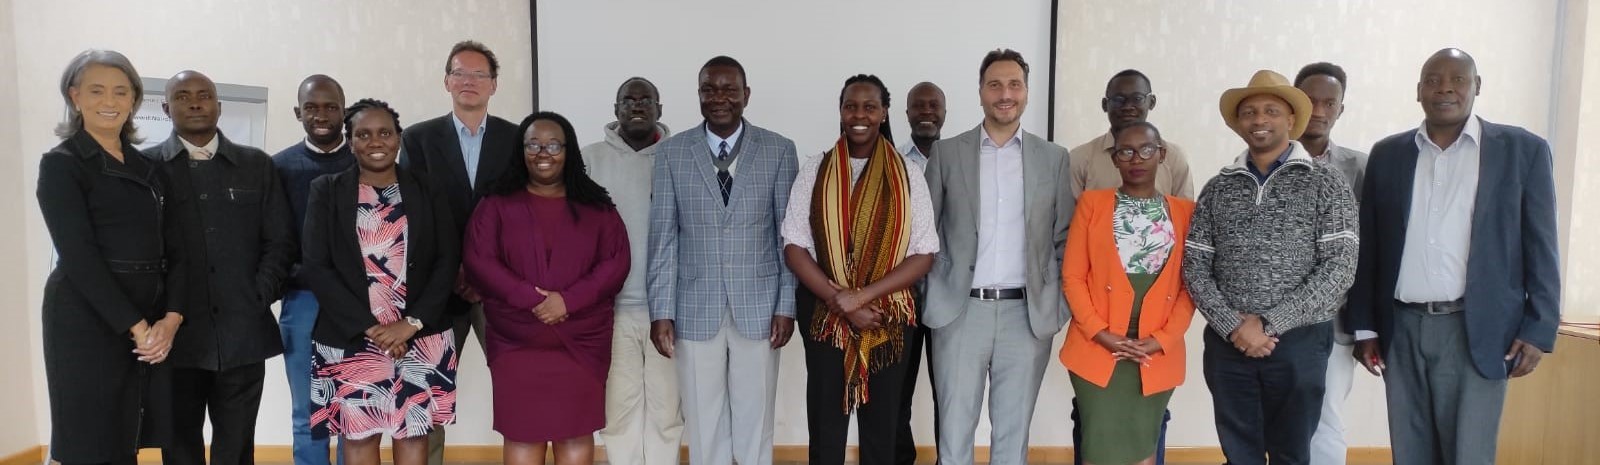 PSF experts in Kenya conduct field mission to consult with local stakeholders